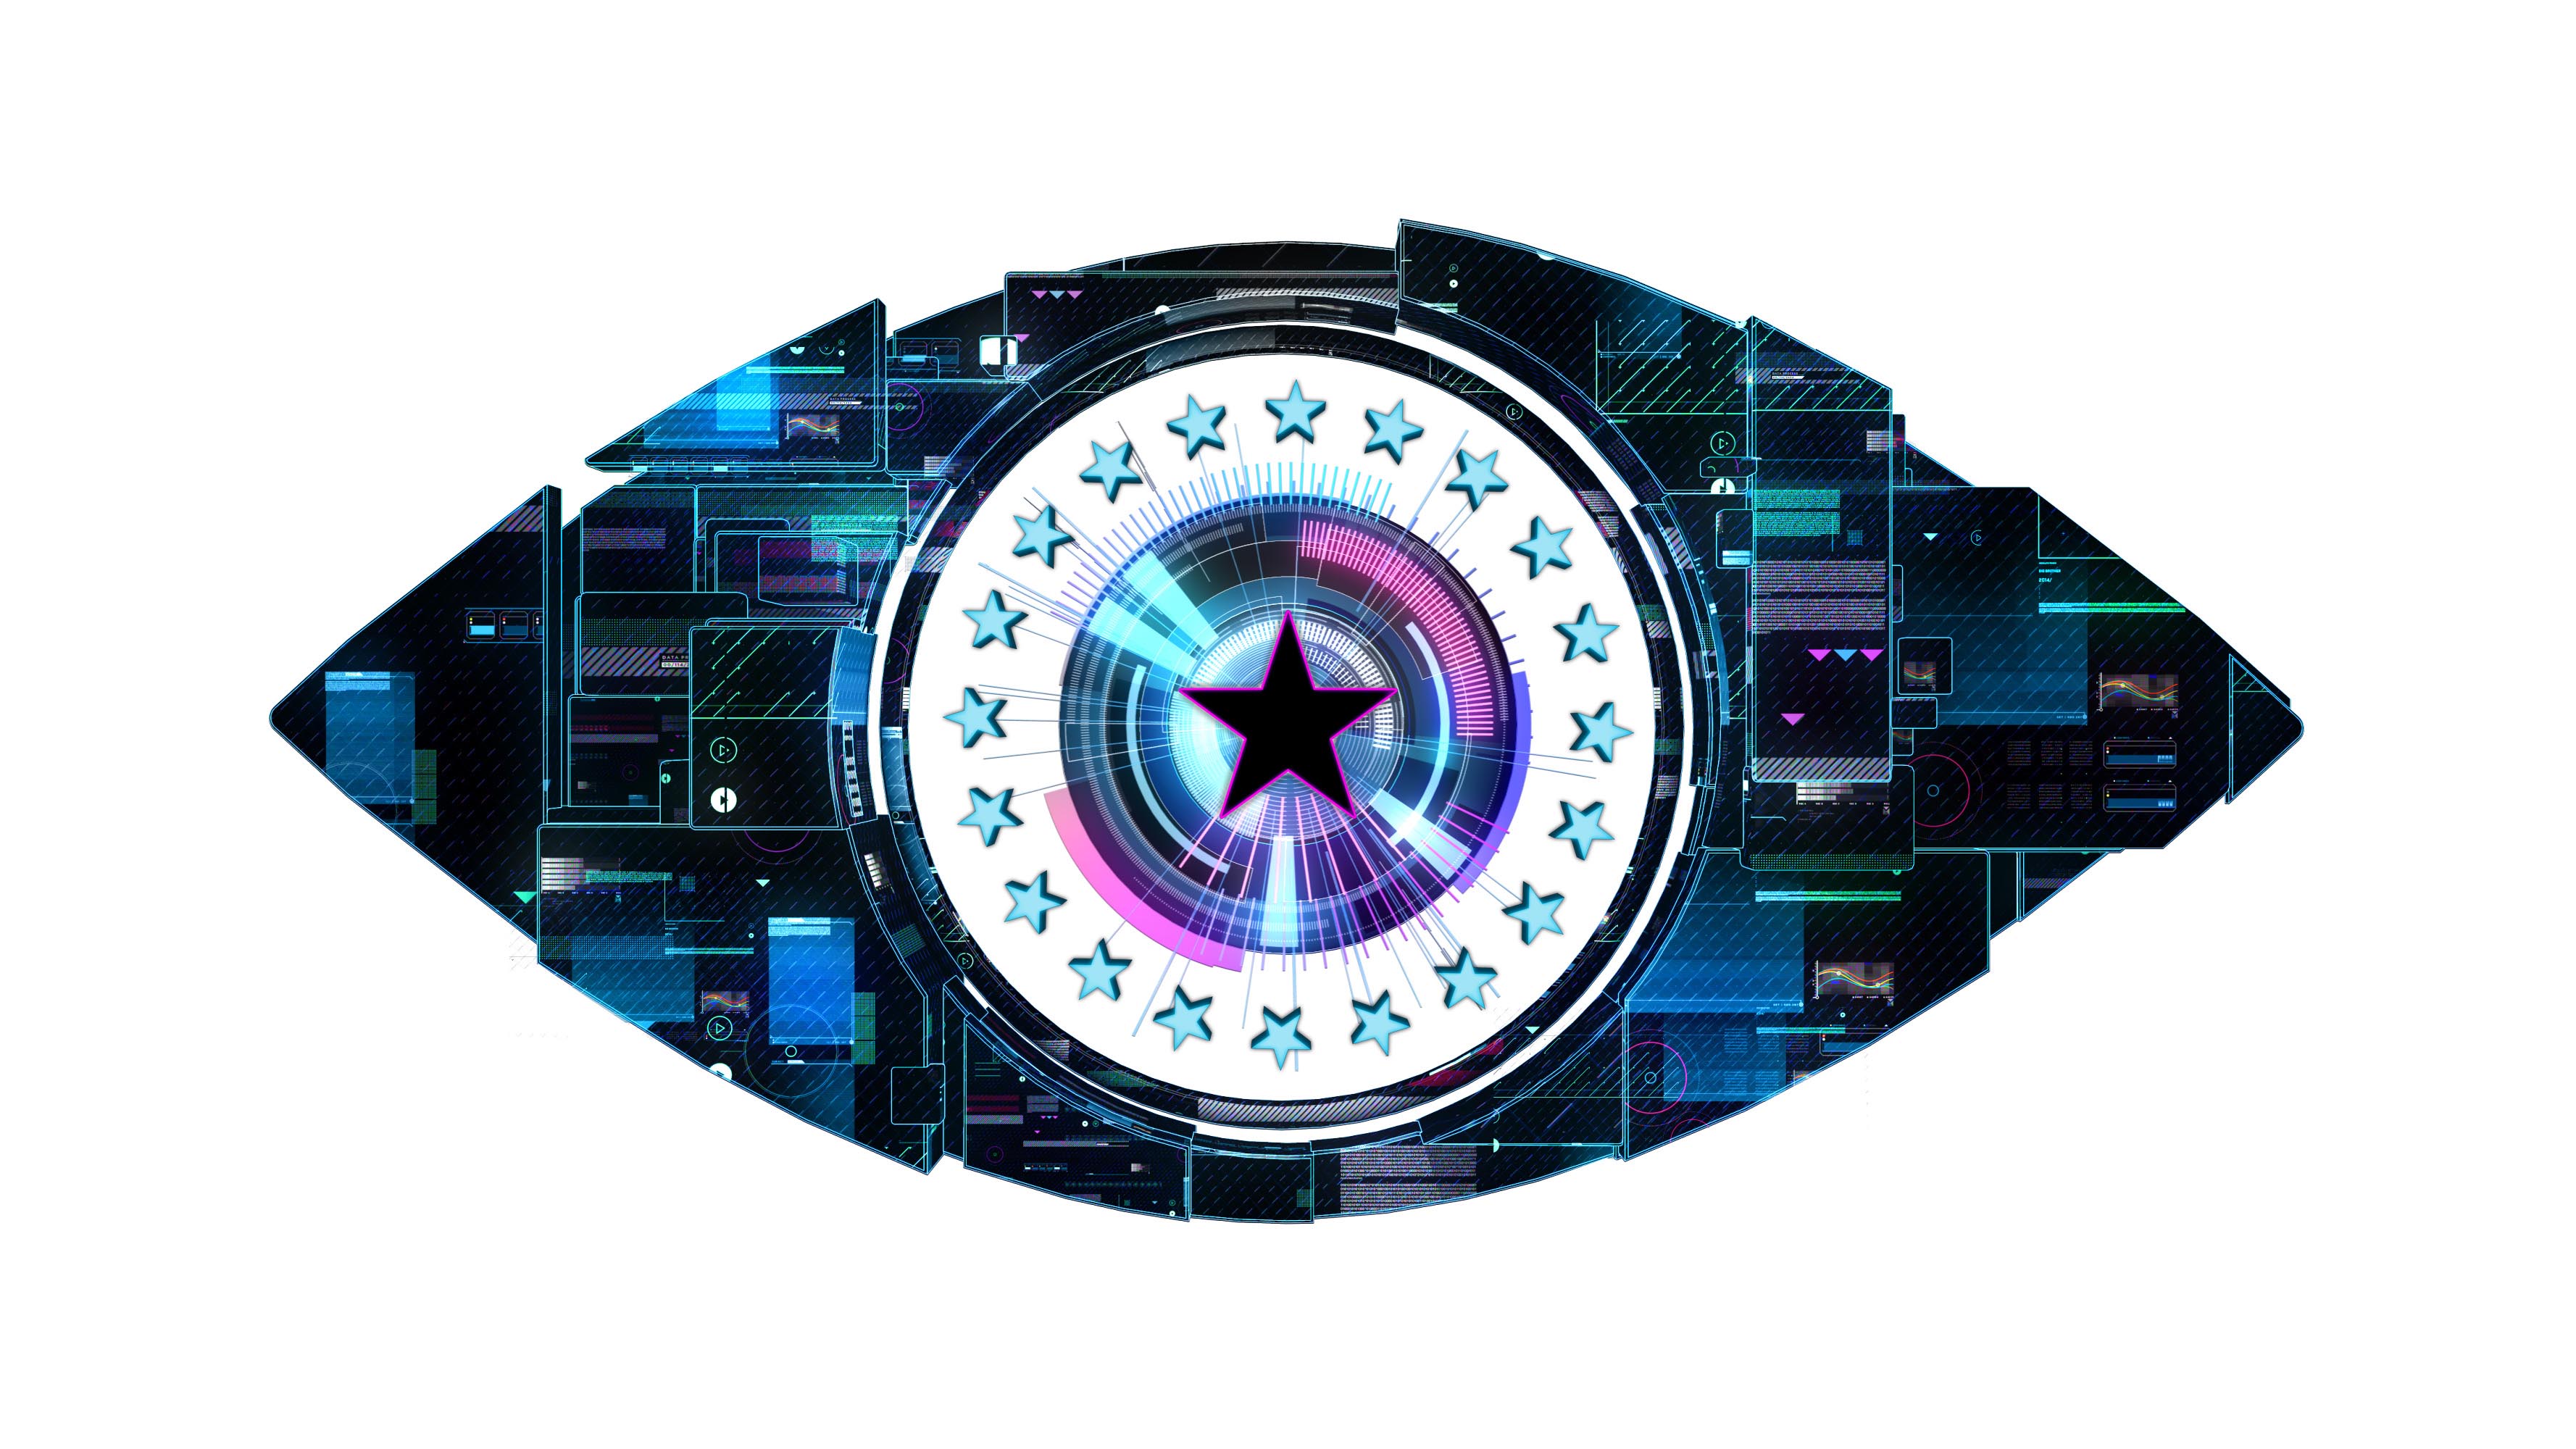 Celebrity Big Brother's Bit on the Psych